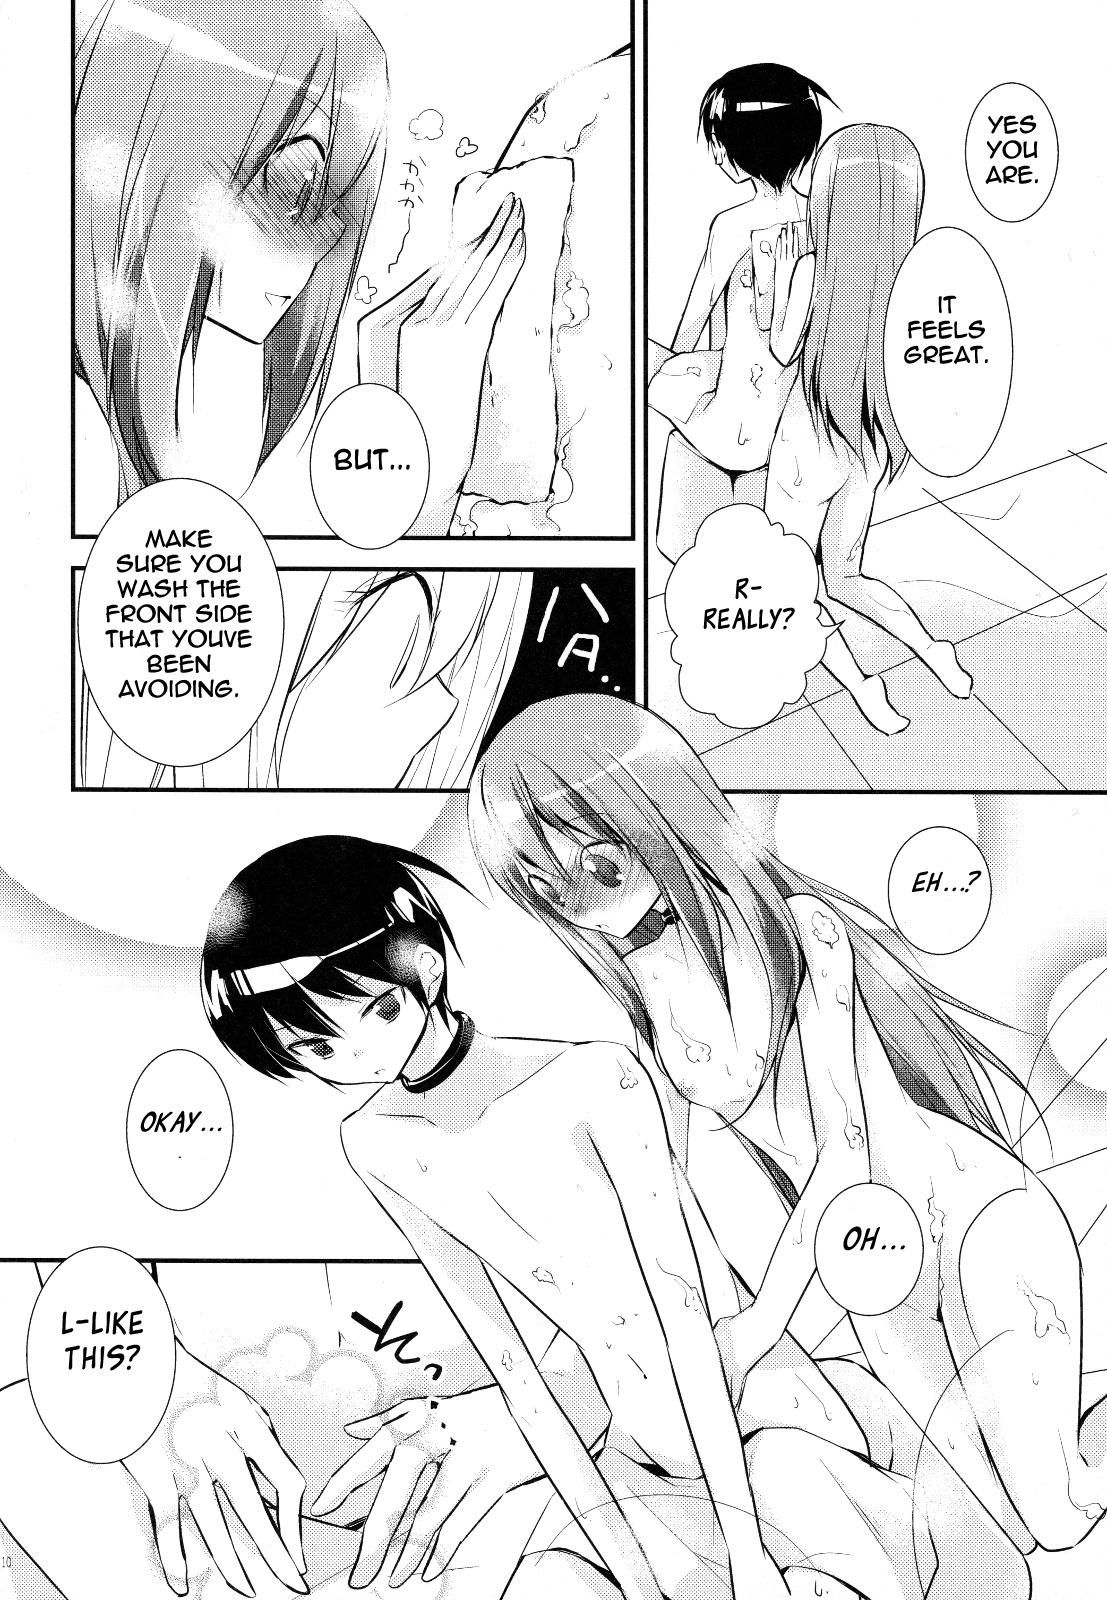 Oral Sex Porn Kamisama no Hentai Play Nikkichou 4 | Kamisama's Hentai Play Diary 4 - The world god only knows Cop - Page 9